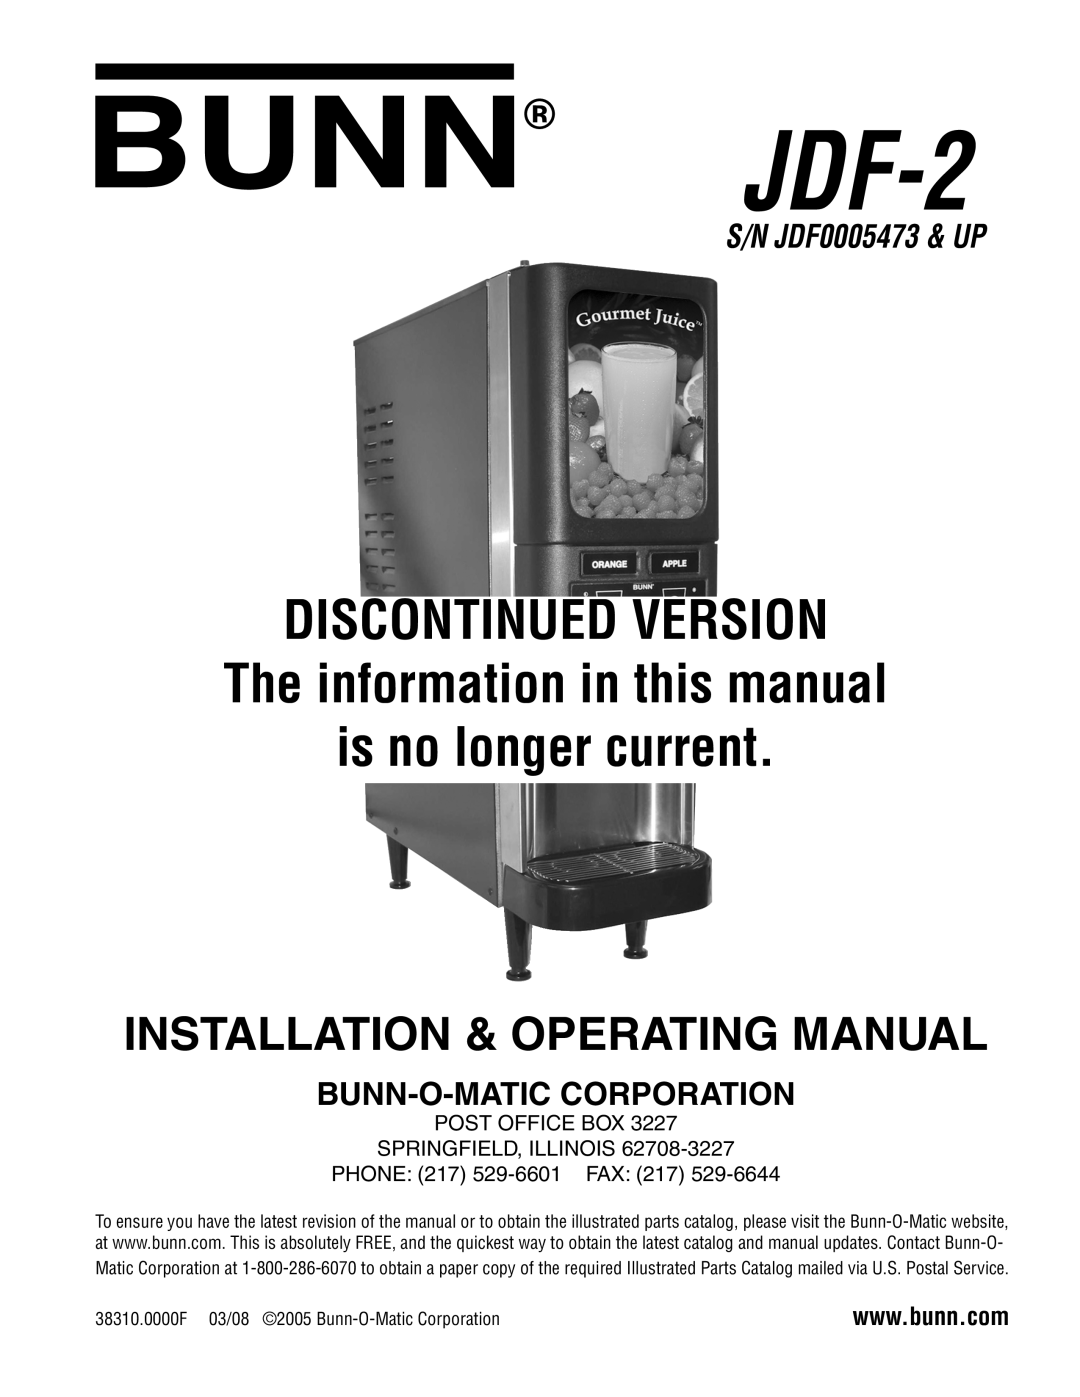 Bunn JDF-2 manual Bunn-O-Maticcorporation, Discontinued Version, The information in this manual, is no longer current 